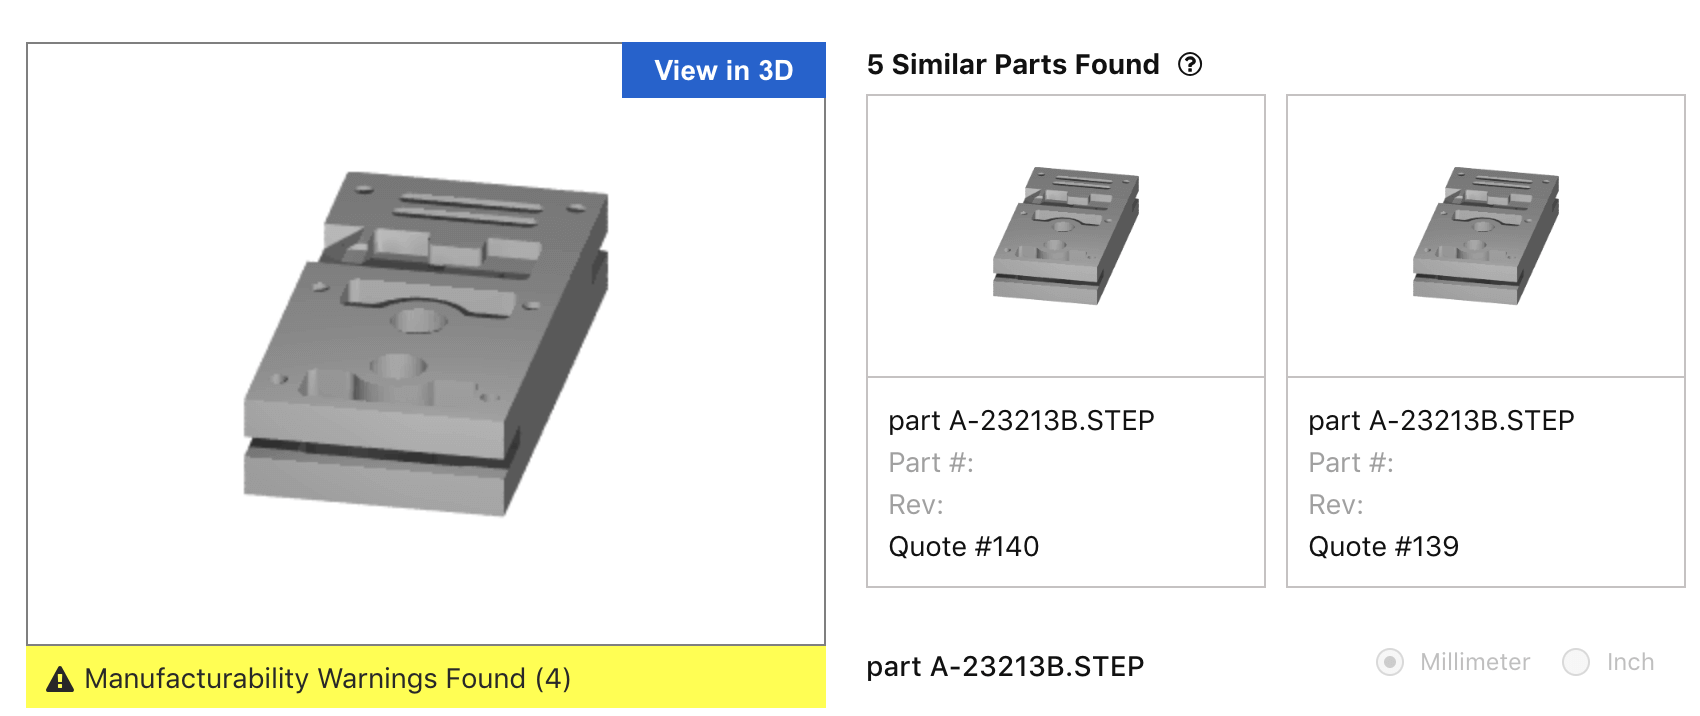 Find similar parts when quoting in Paperless Parts